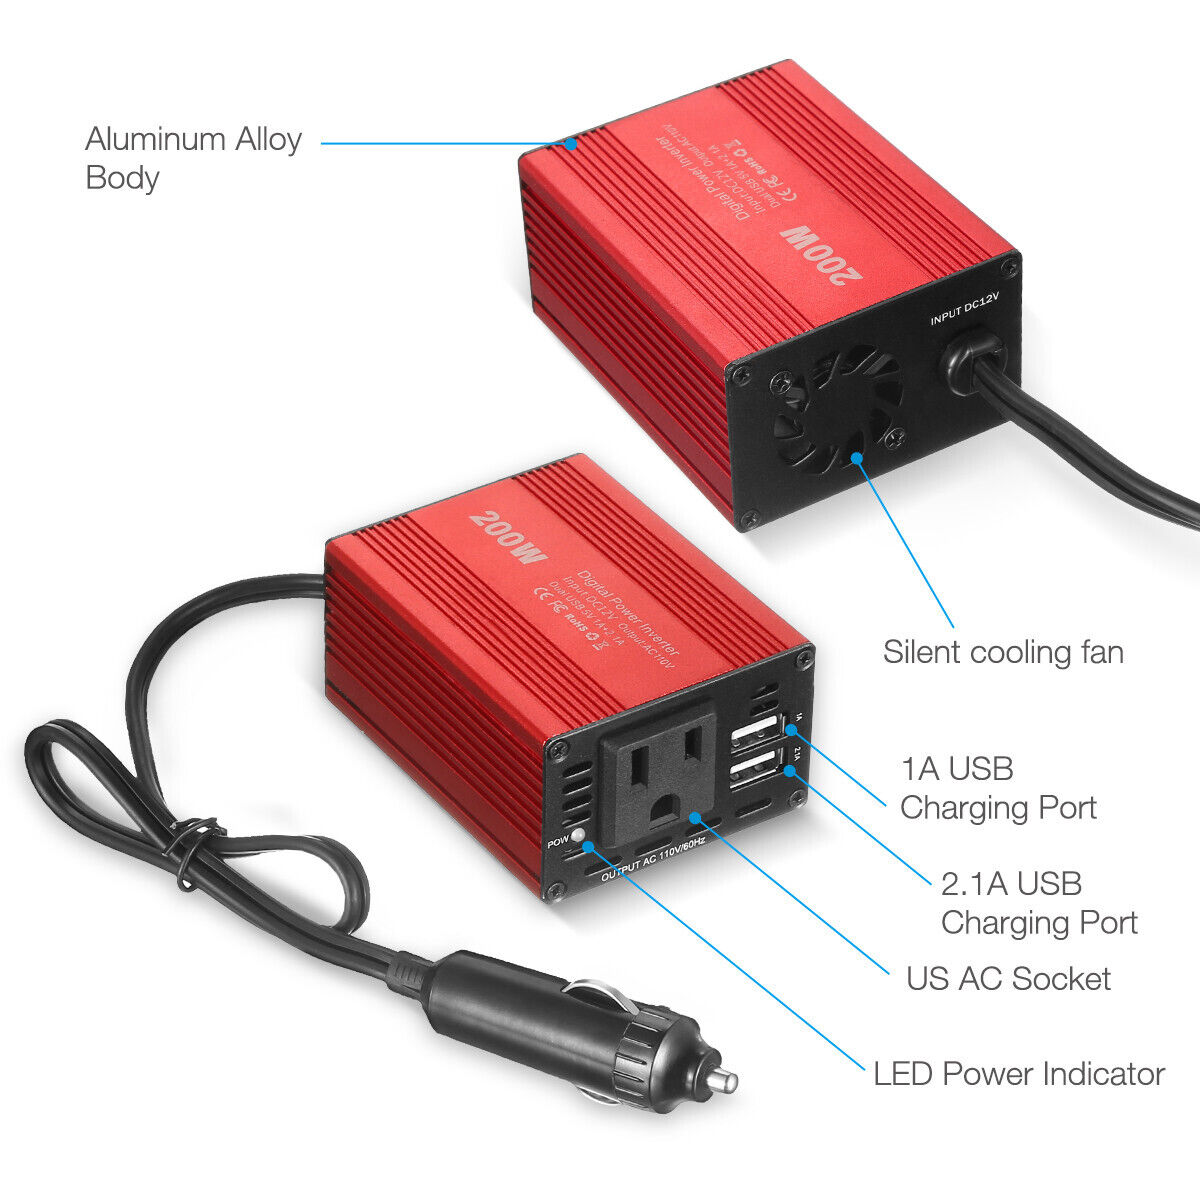 200W Car Power Inverter DC 12V to AC 110V 120V Converter Adapter Charger Outlet Powerextra Does Not Apply - фотография #7